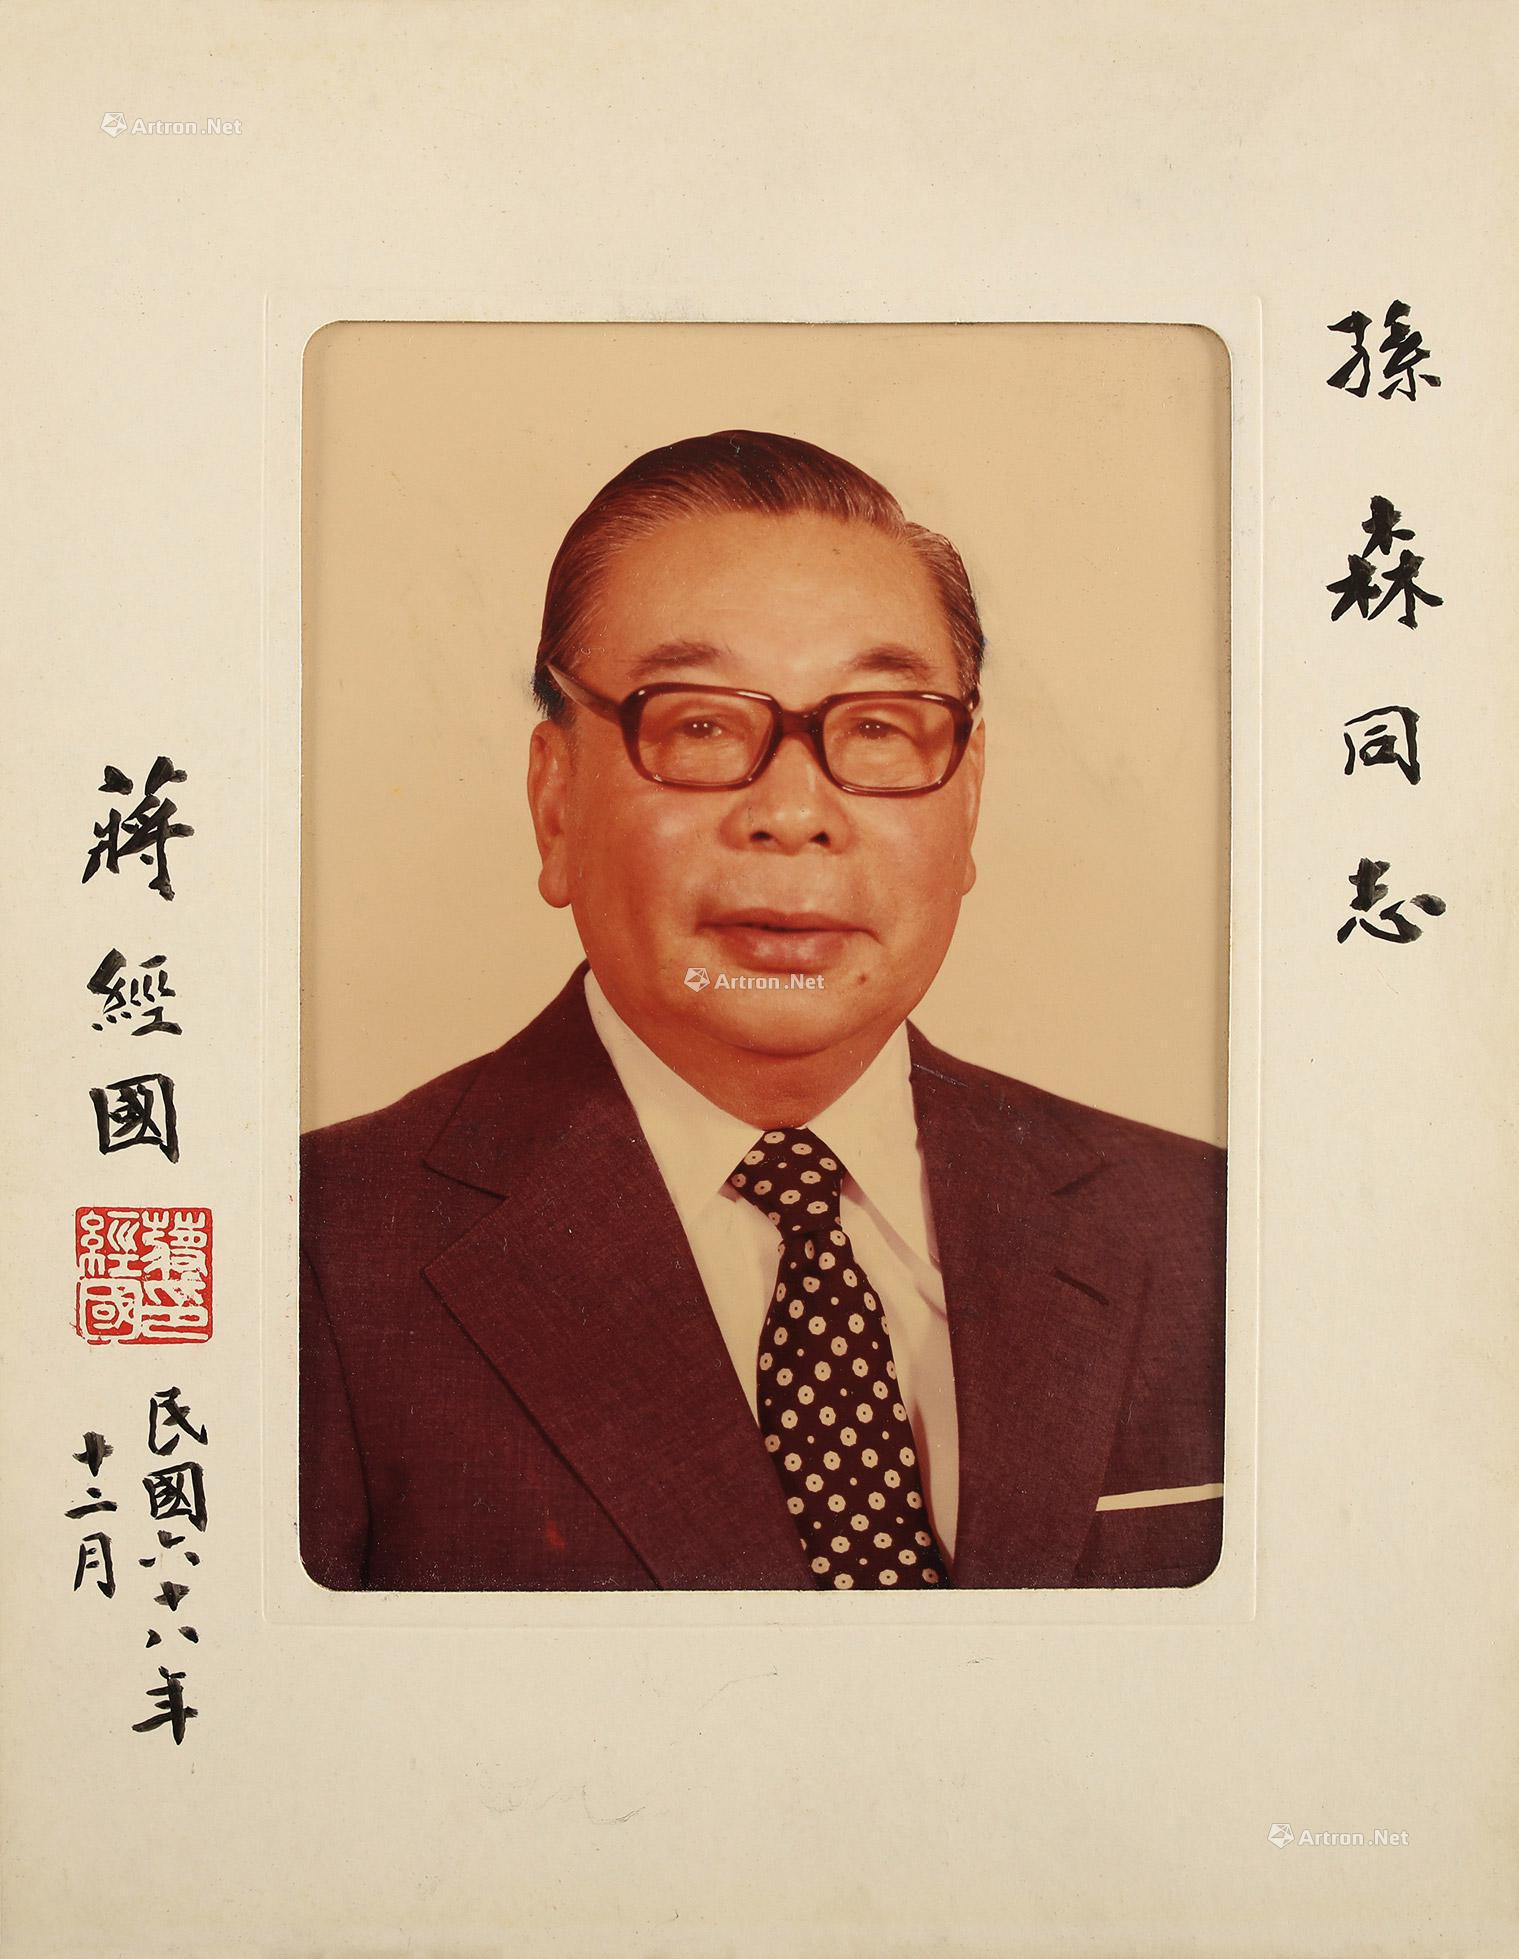 Printed photo autographed by Chiang Ching-kuo